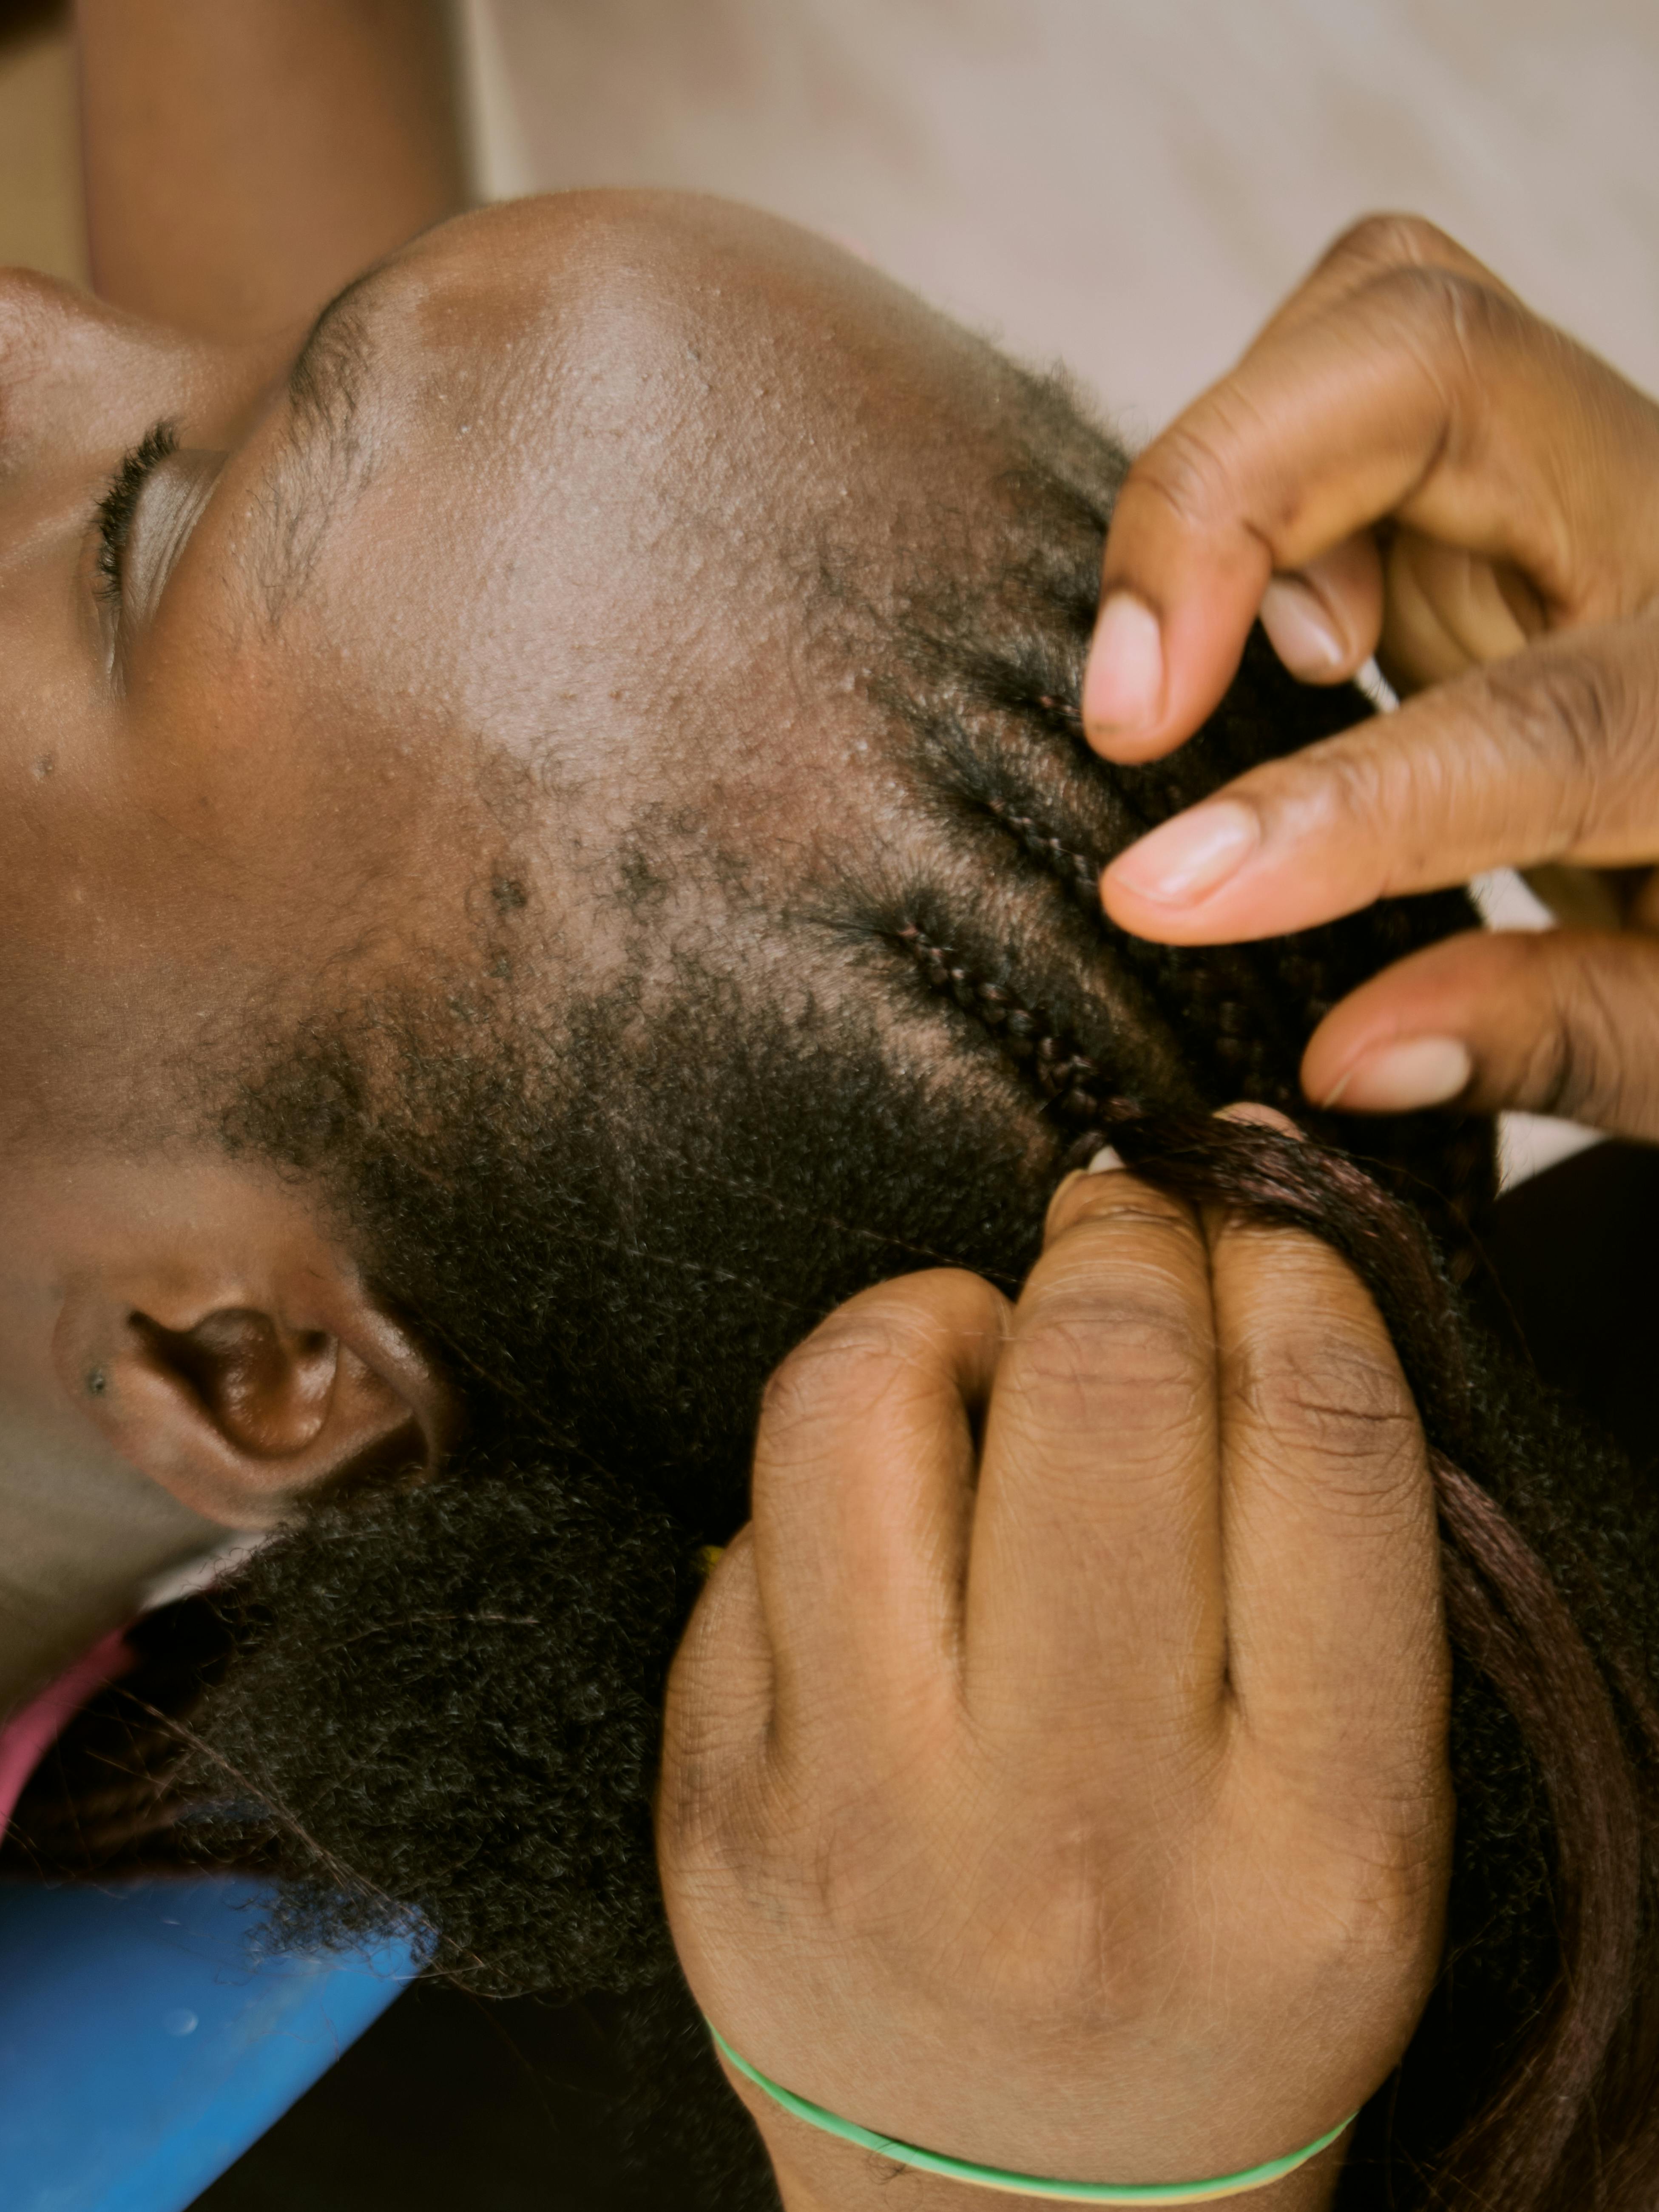 For illustration purposes only. A woman's hair being braided with hair extensions | Source: Pexels